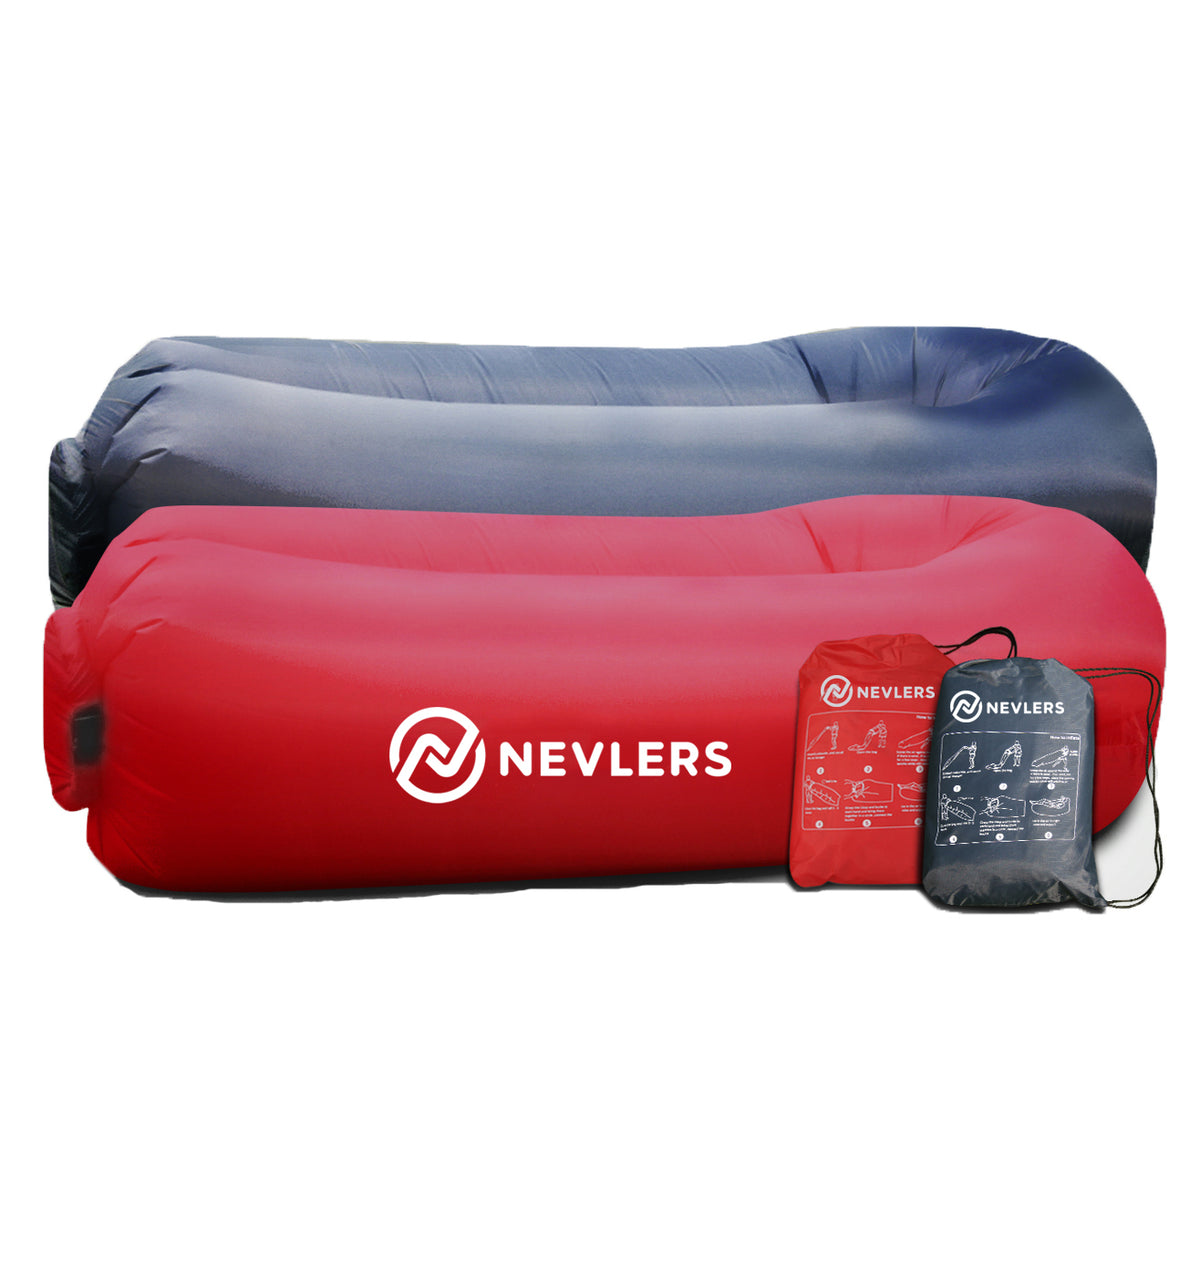 Inflatable Loungers - Navy/Red - 2 Pack